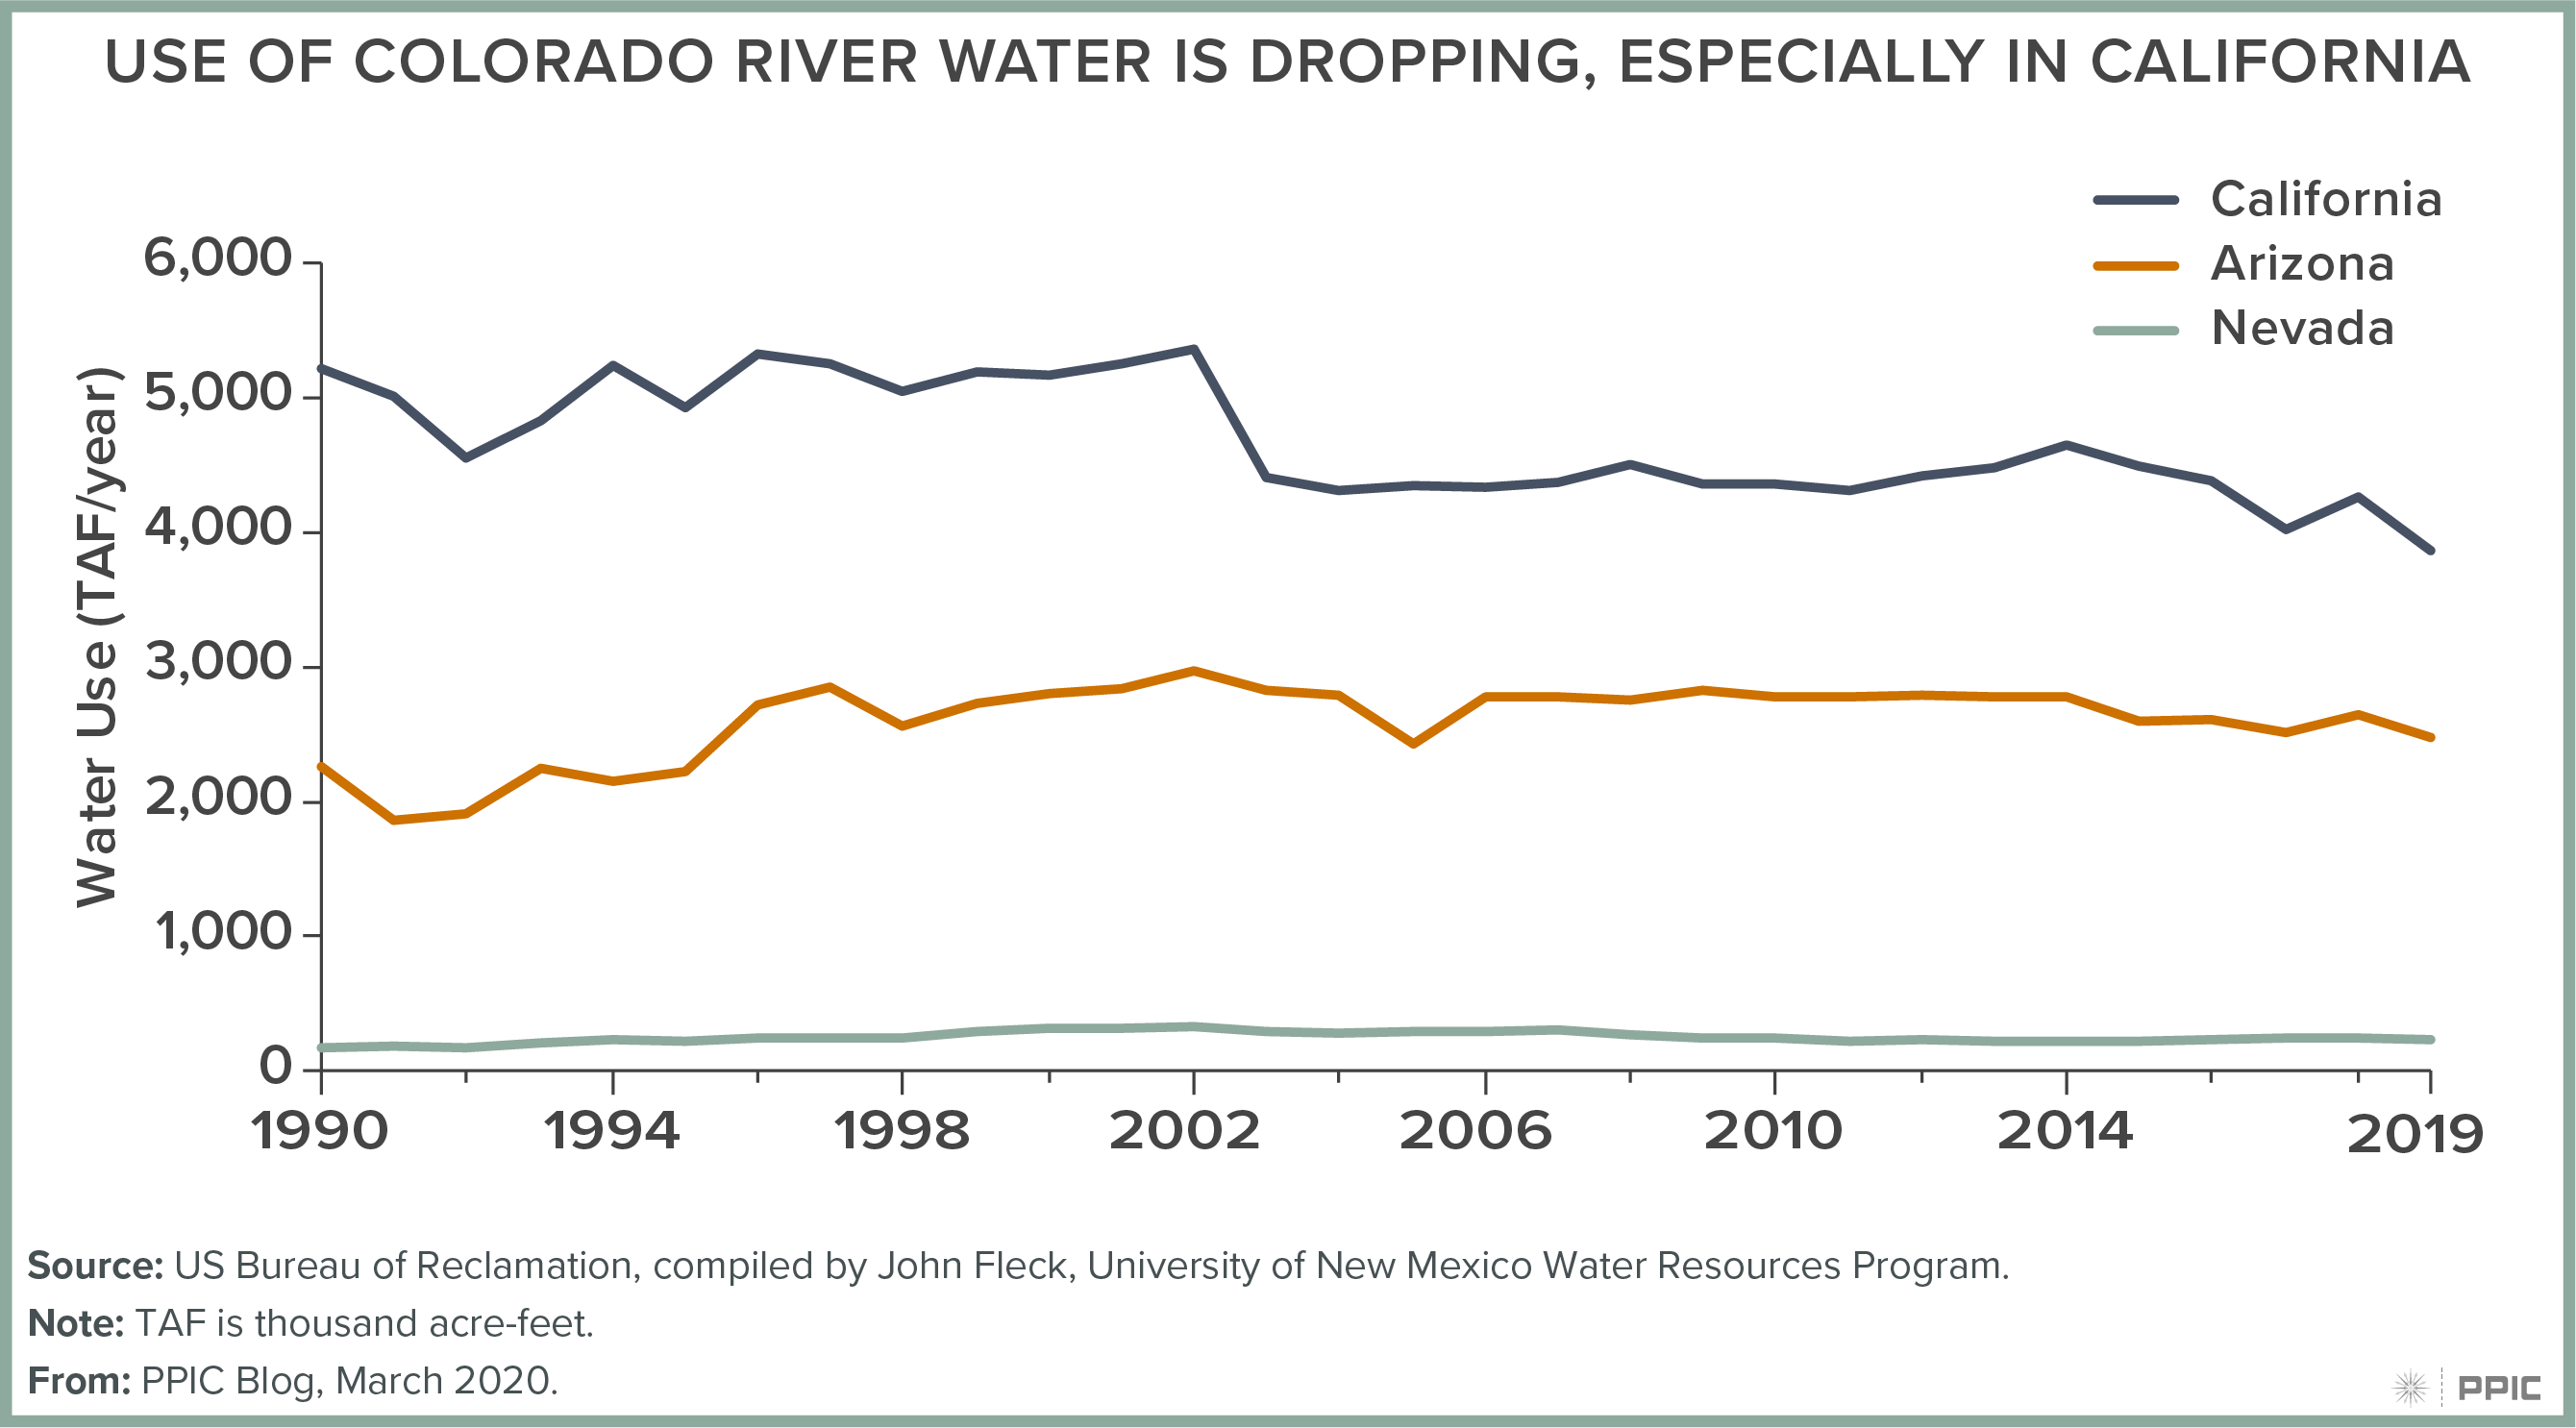 figure - Use of Colorado River Water Is Dropping, Especially in California